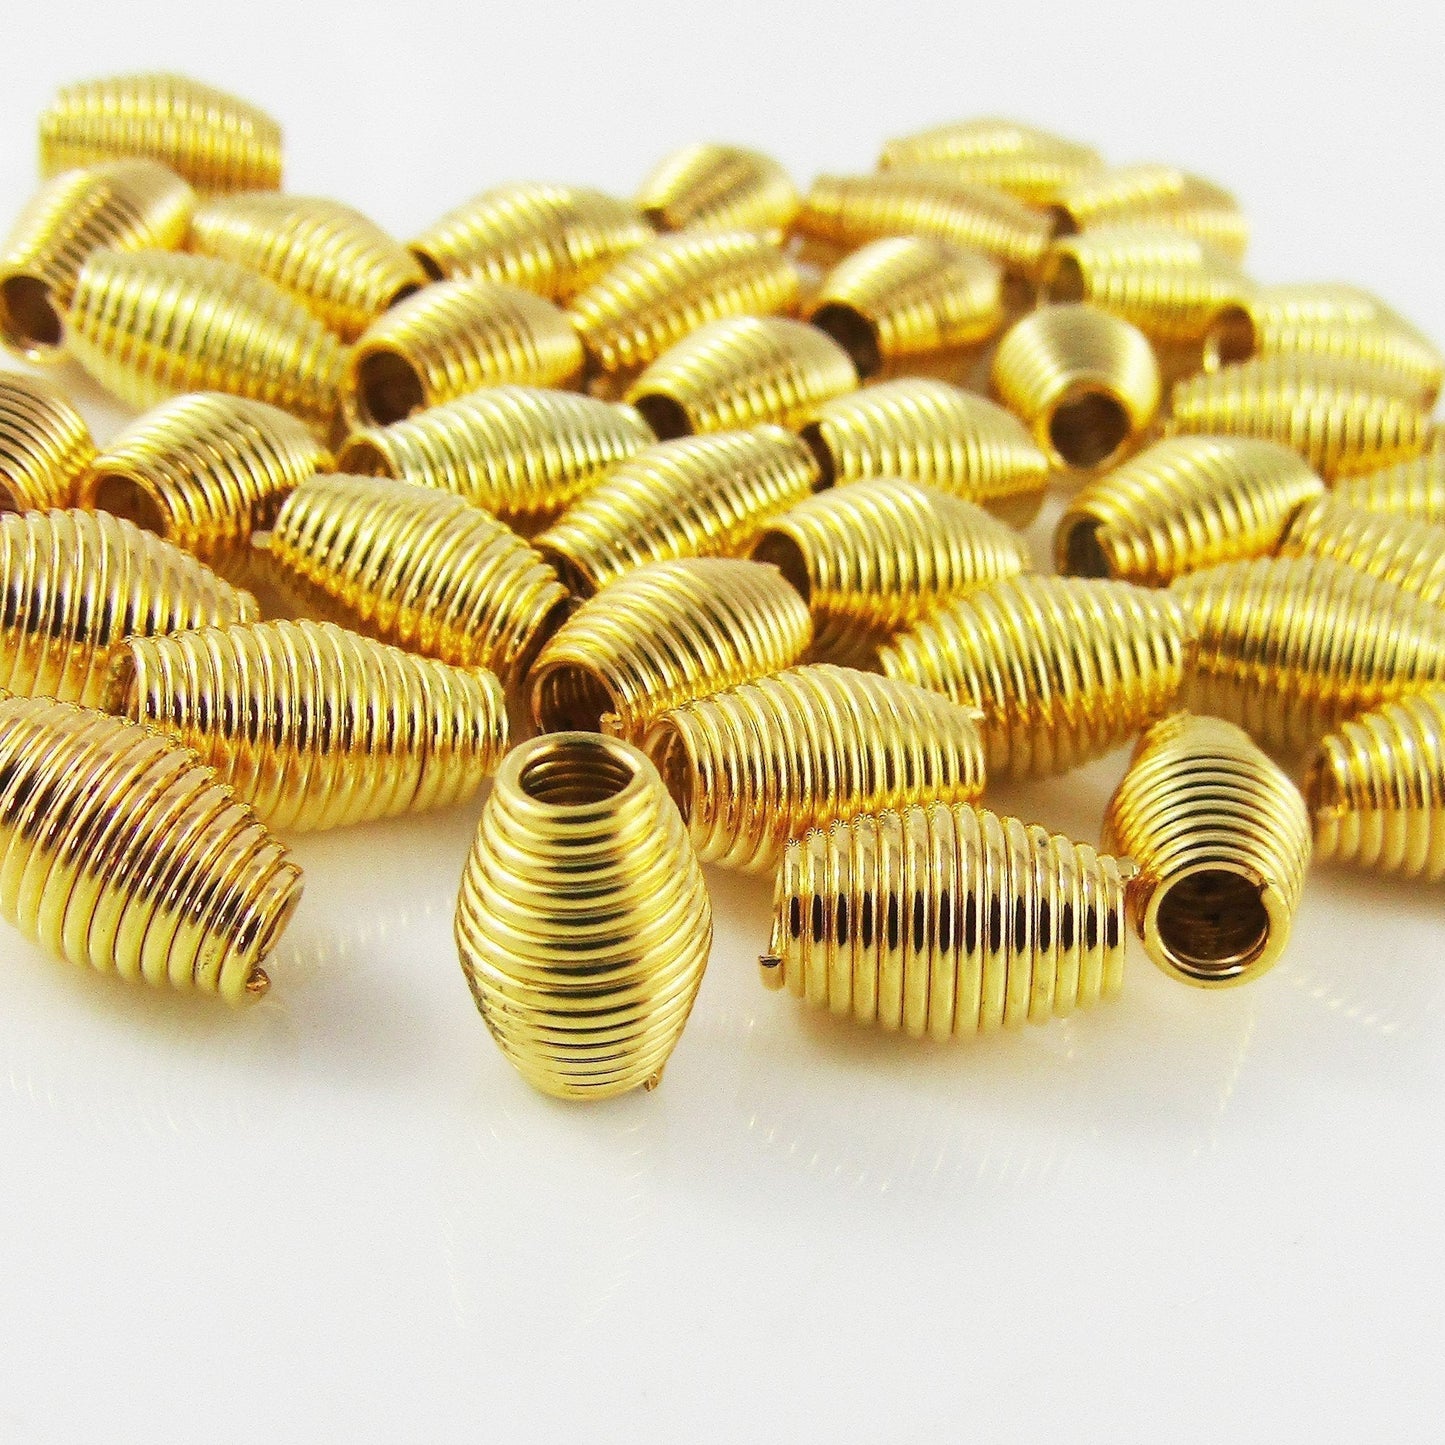 50g 95+pcs Spring Coil Spacer Beads Craft etc 9x6mm Hole 2mm Gold